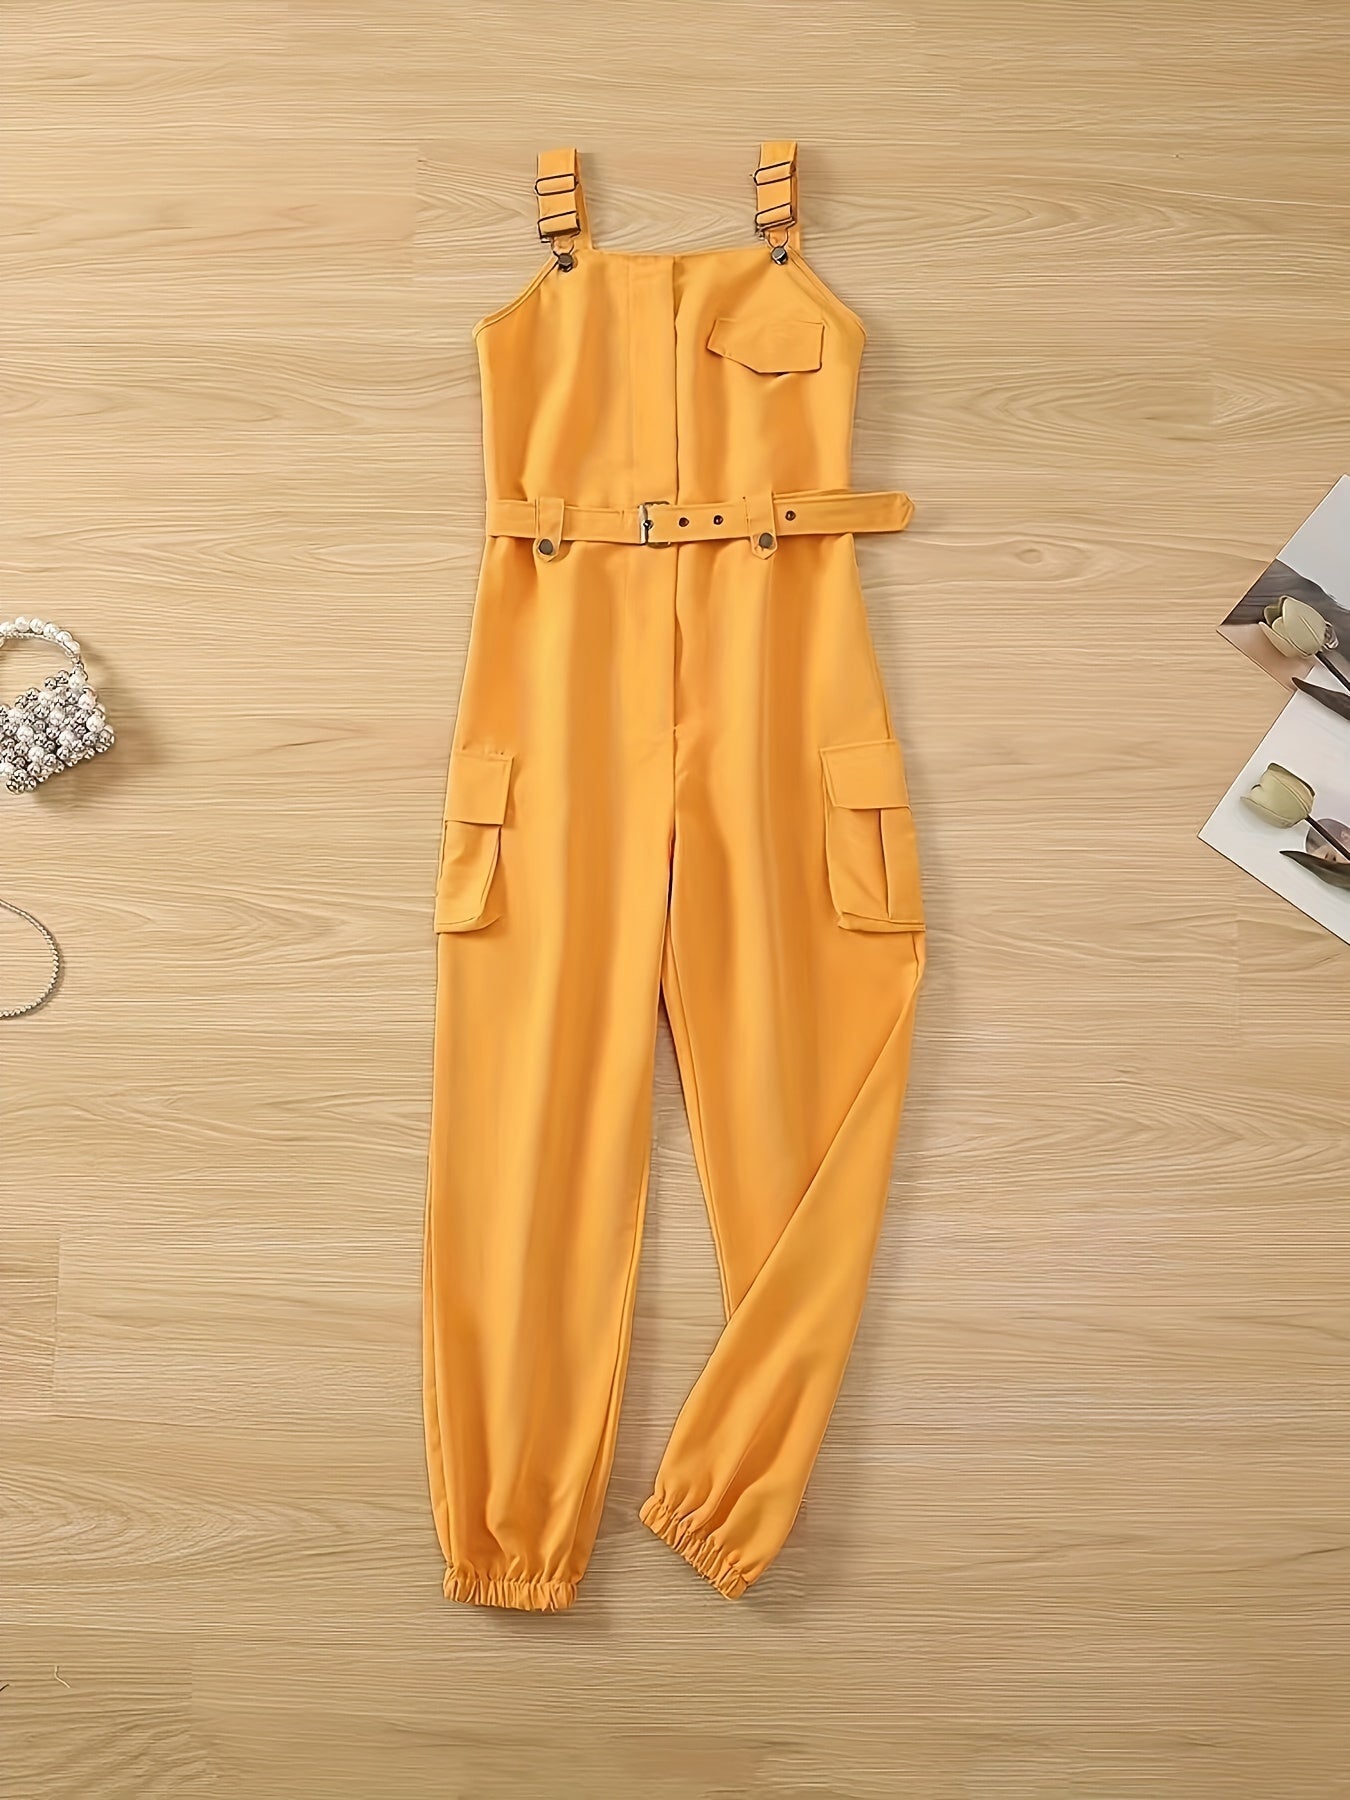 Flap Pockets Belted Overall Jumpsuit, Casual Overall Jumpsuit For Spring & Summer, Women's Clothing